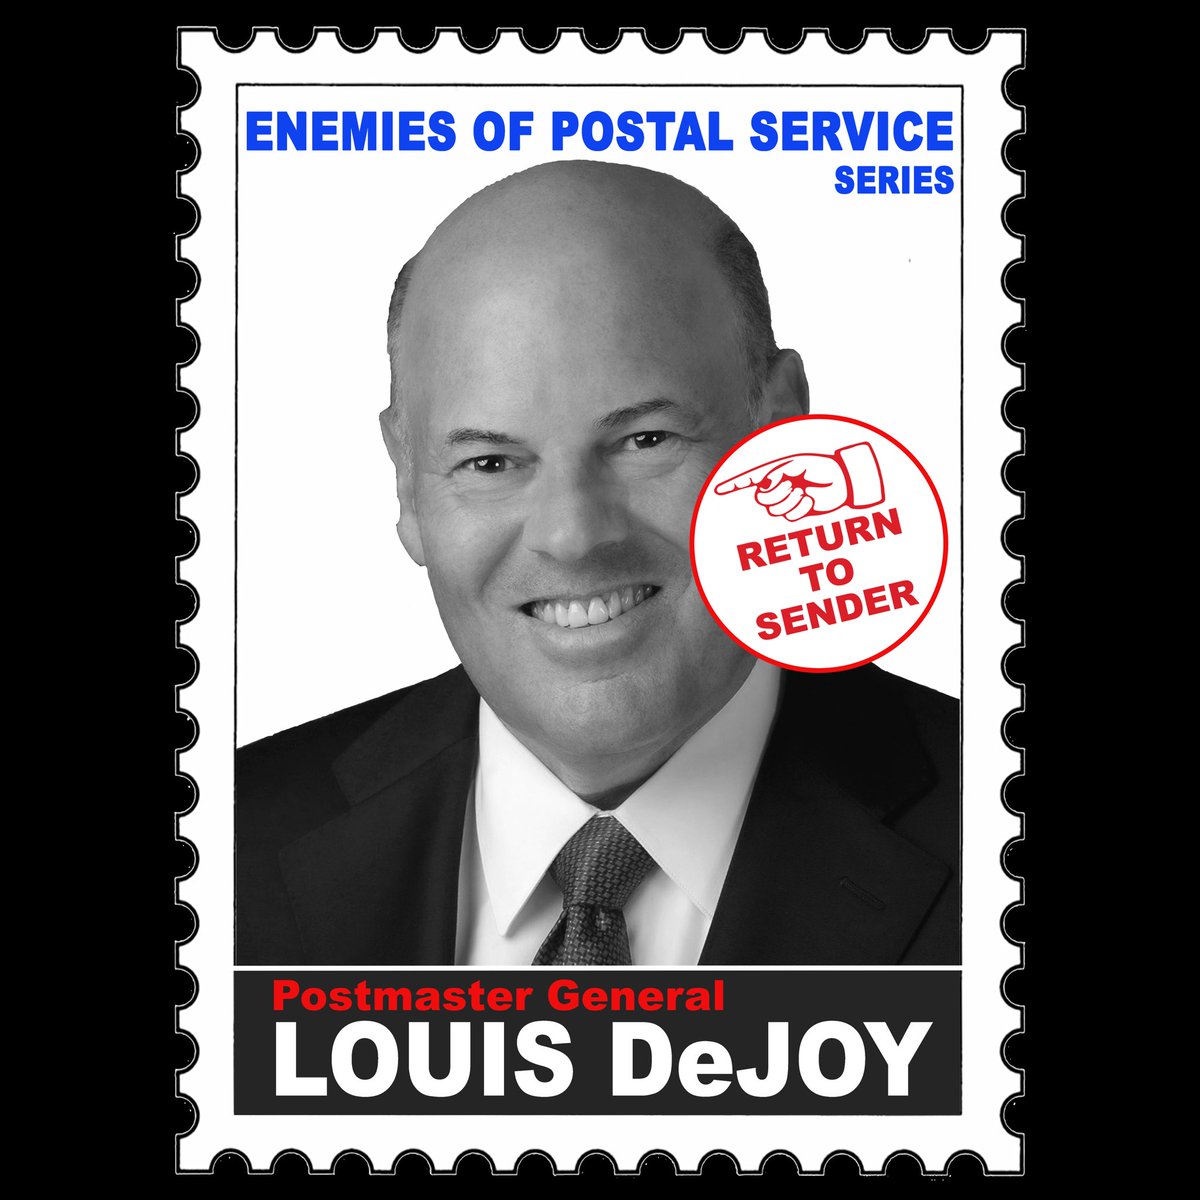 • Postmaster General Louis DeJoy owns at least $30 million in USPS competitors - he benefits if USPS fails• Slowed down service by slashing overtime and destroying sorting machines.                /2